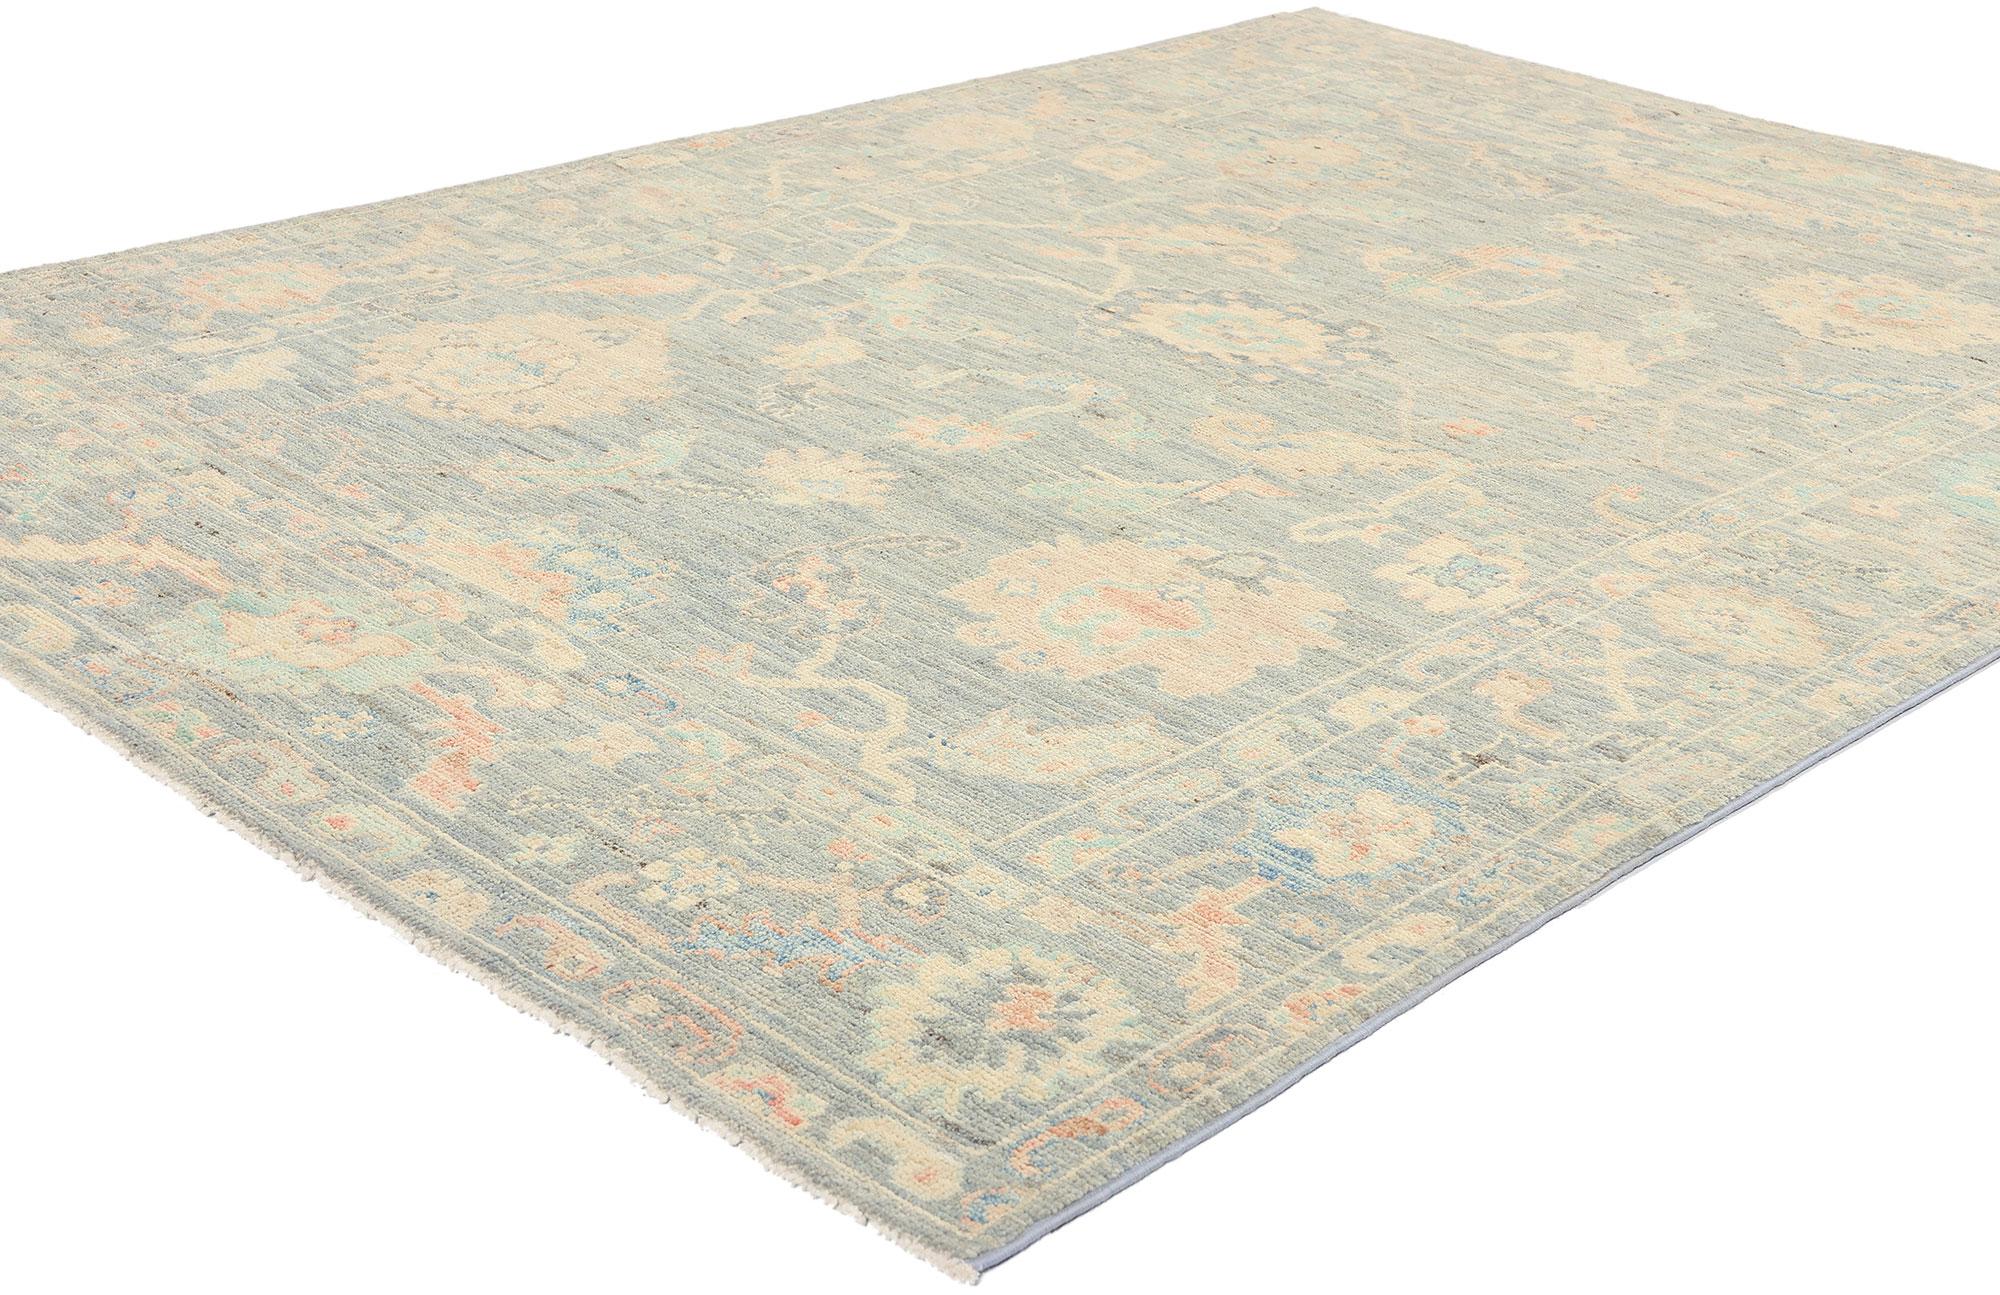 80883 New Modern Style Oushak Rug with Soft Pastel Colors, 04'11 x 07'00. In this hand-knotted wool contemporary Oushak rug, contemporary elegance merges seamlessly with quiet sophistication, resulting in a captivating piece that exudes timeless